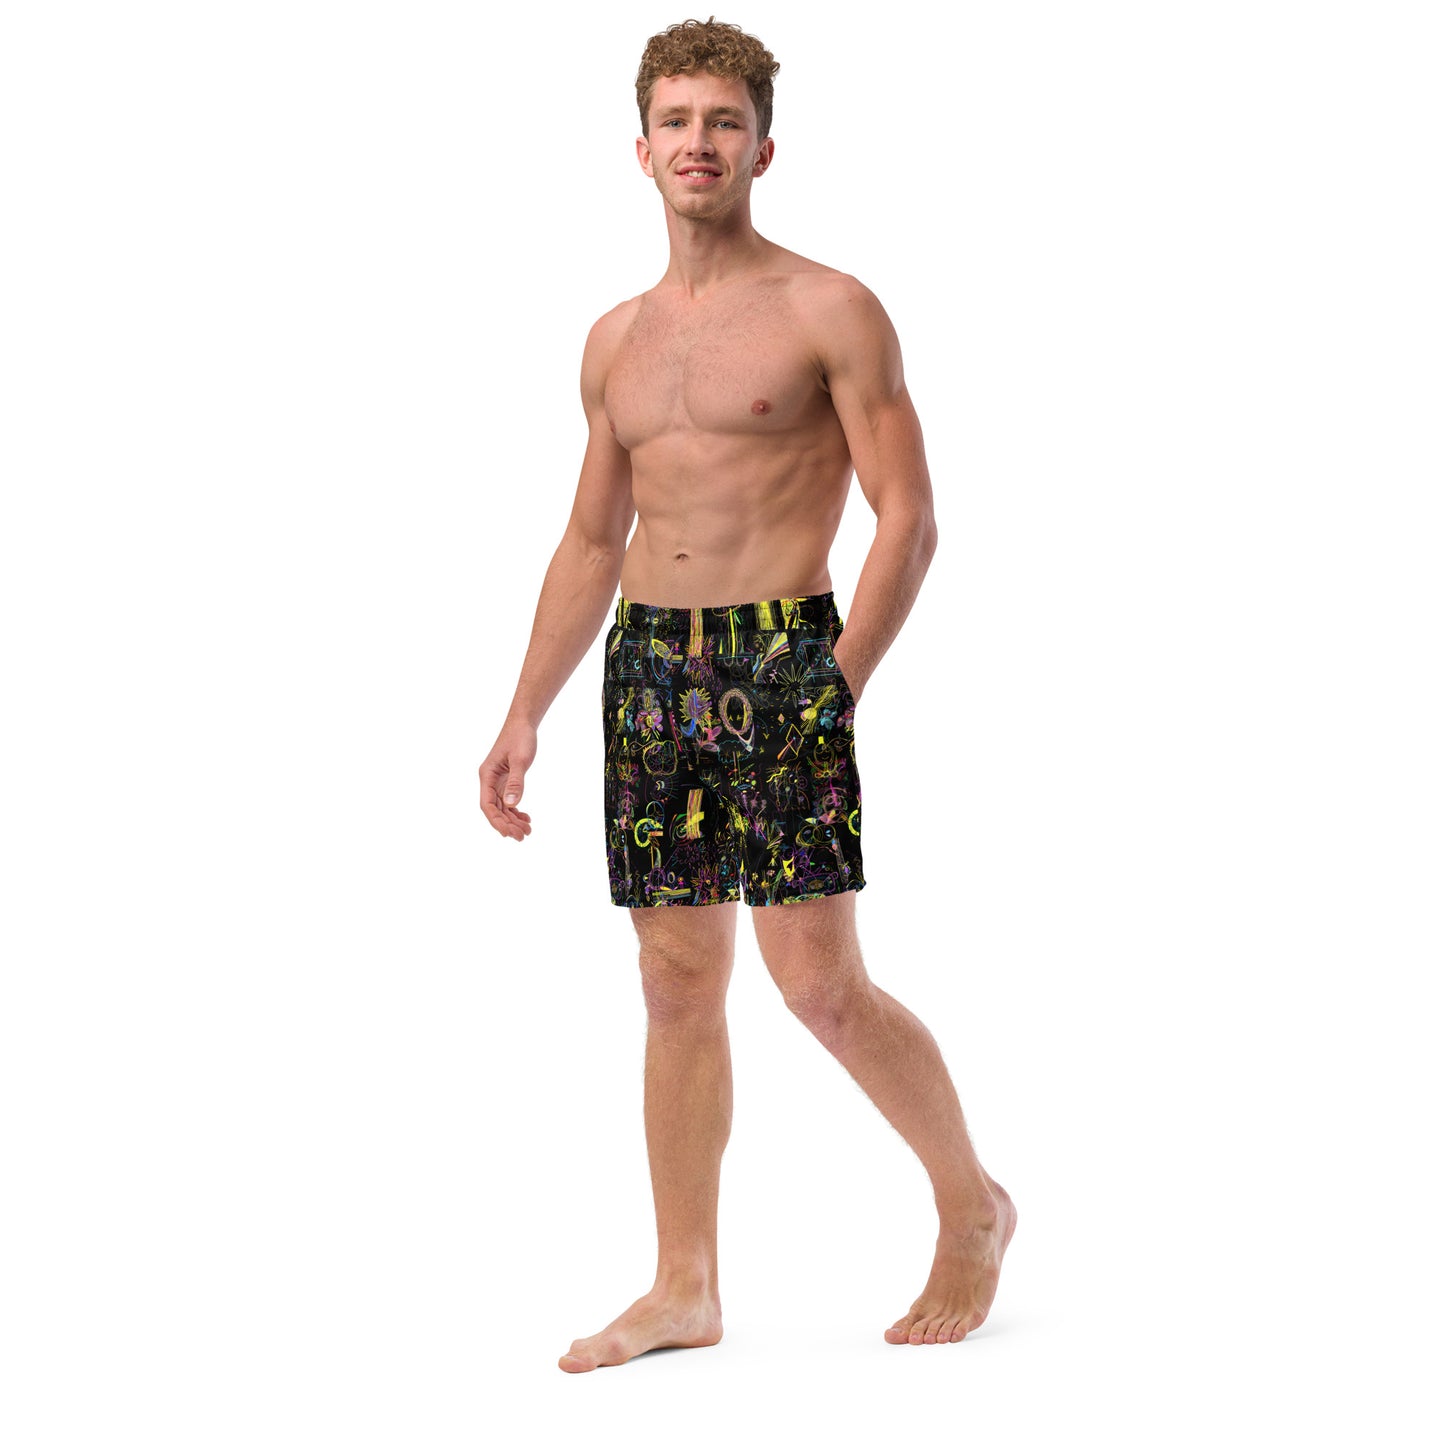 the GODDESS is calling, masculine recycled swim trunks in black